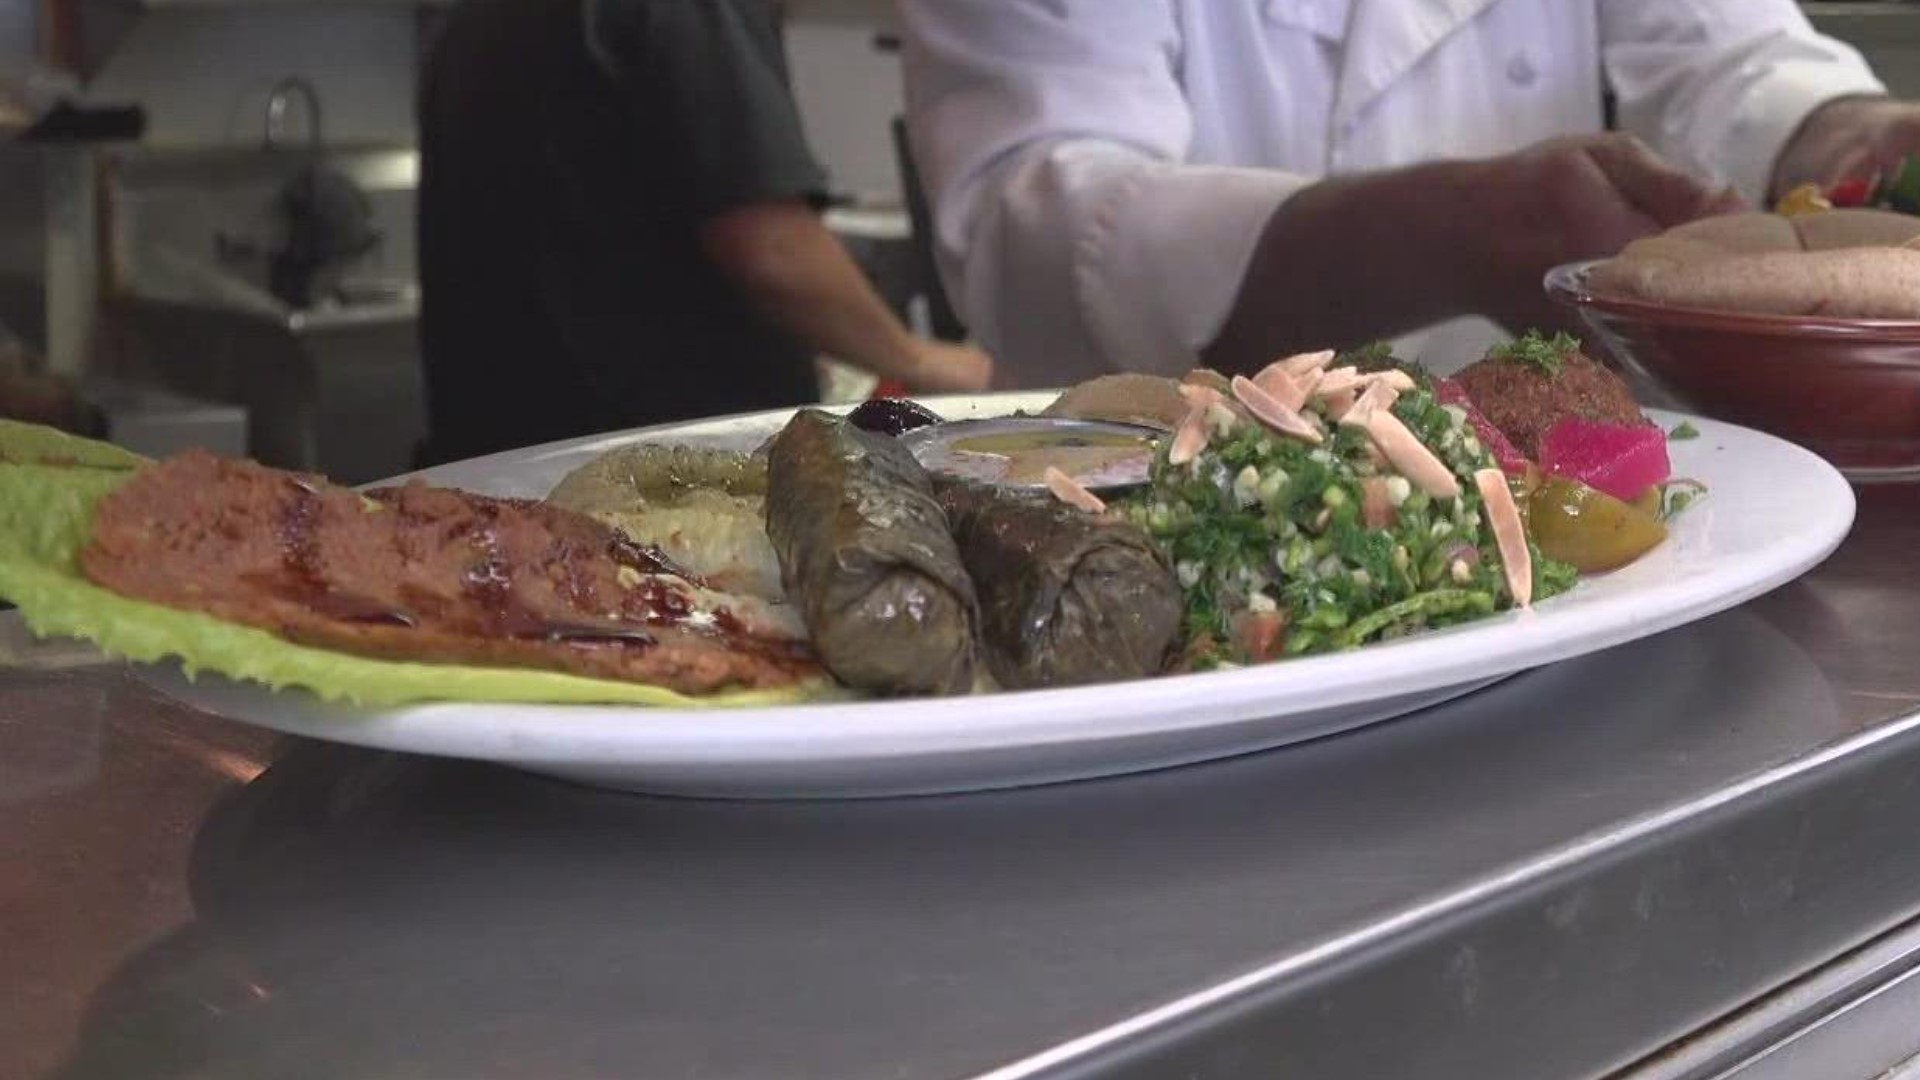 The owner of Baladi Mediterranean Cafe says all of their food is made in-house. They offer meat, seafood and vegetarian options on the menu.